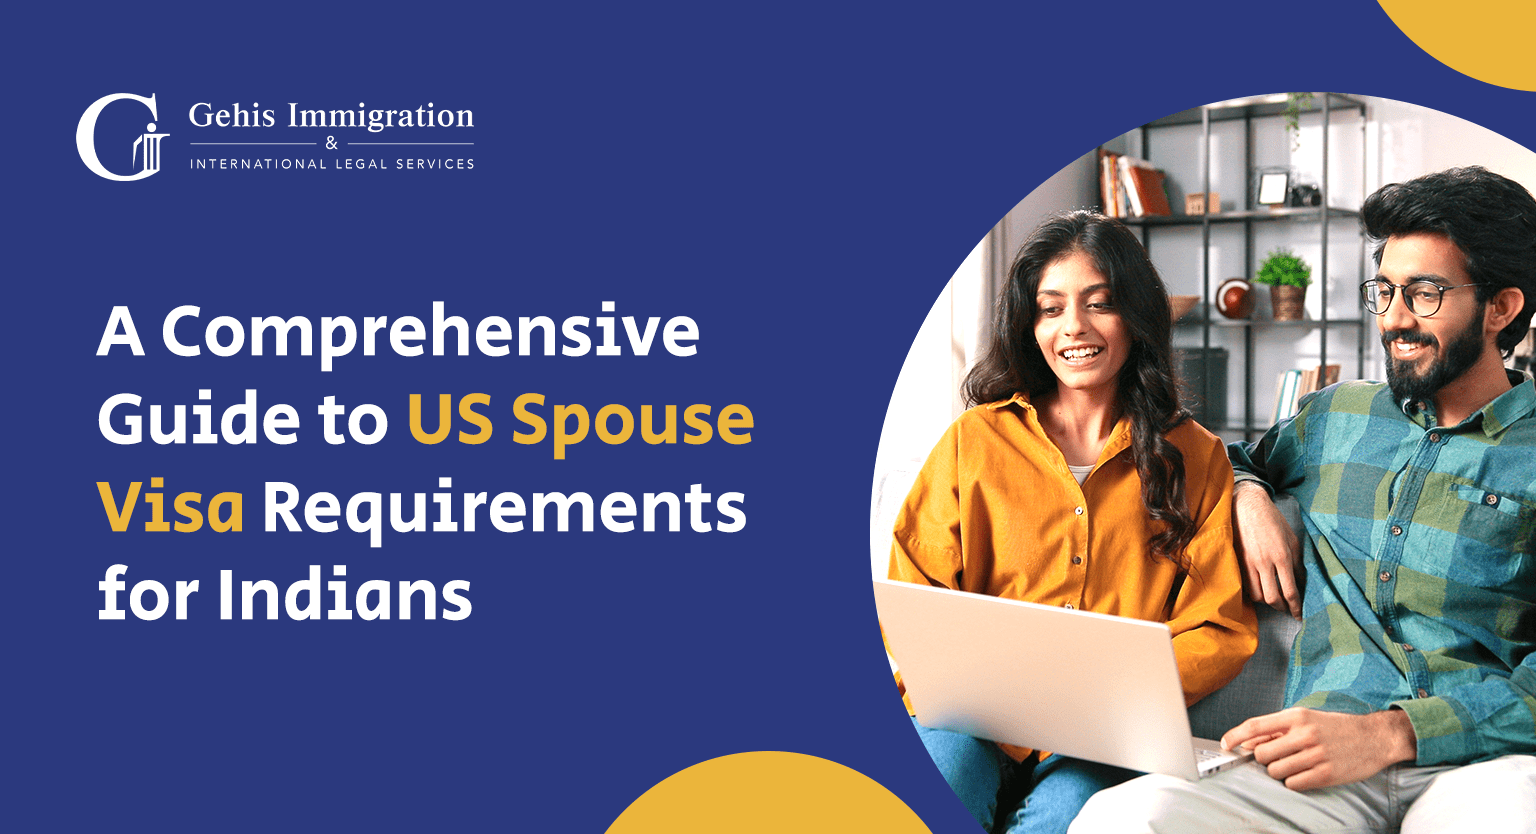 A Guide to US Spouse Visa Requirements for Indians